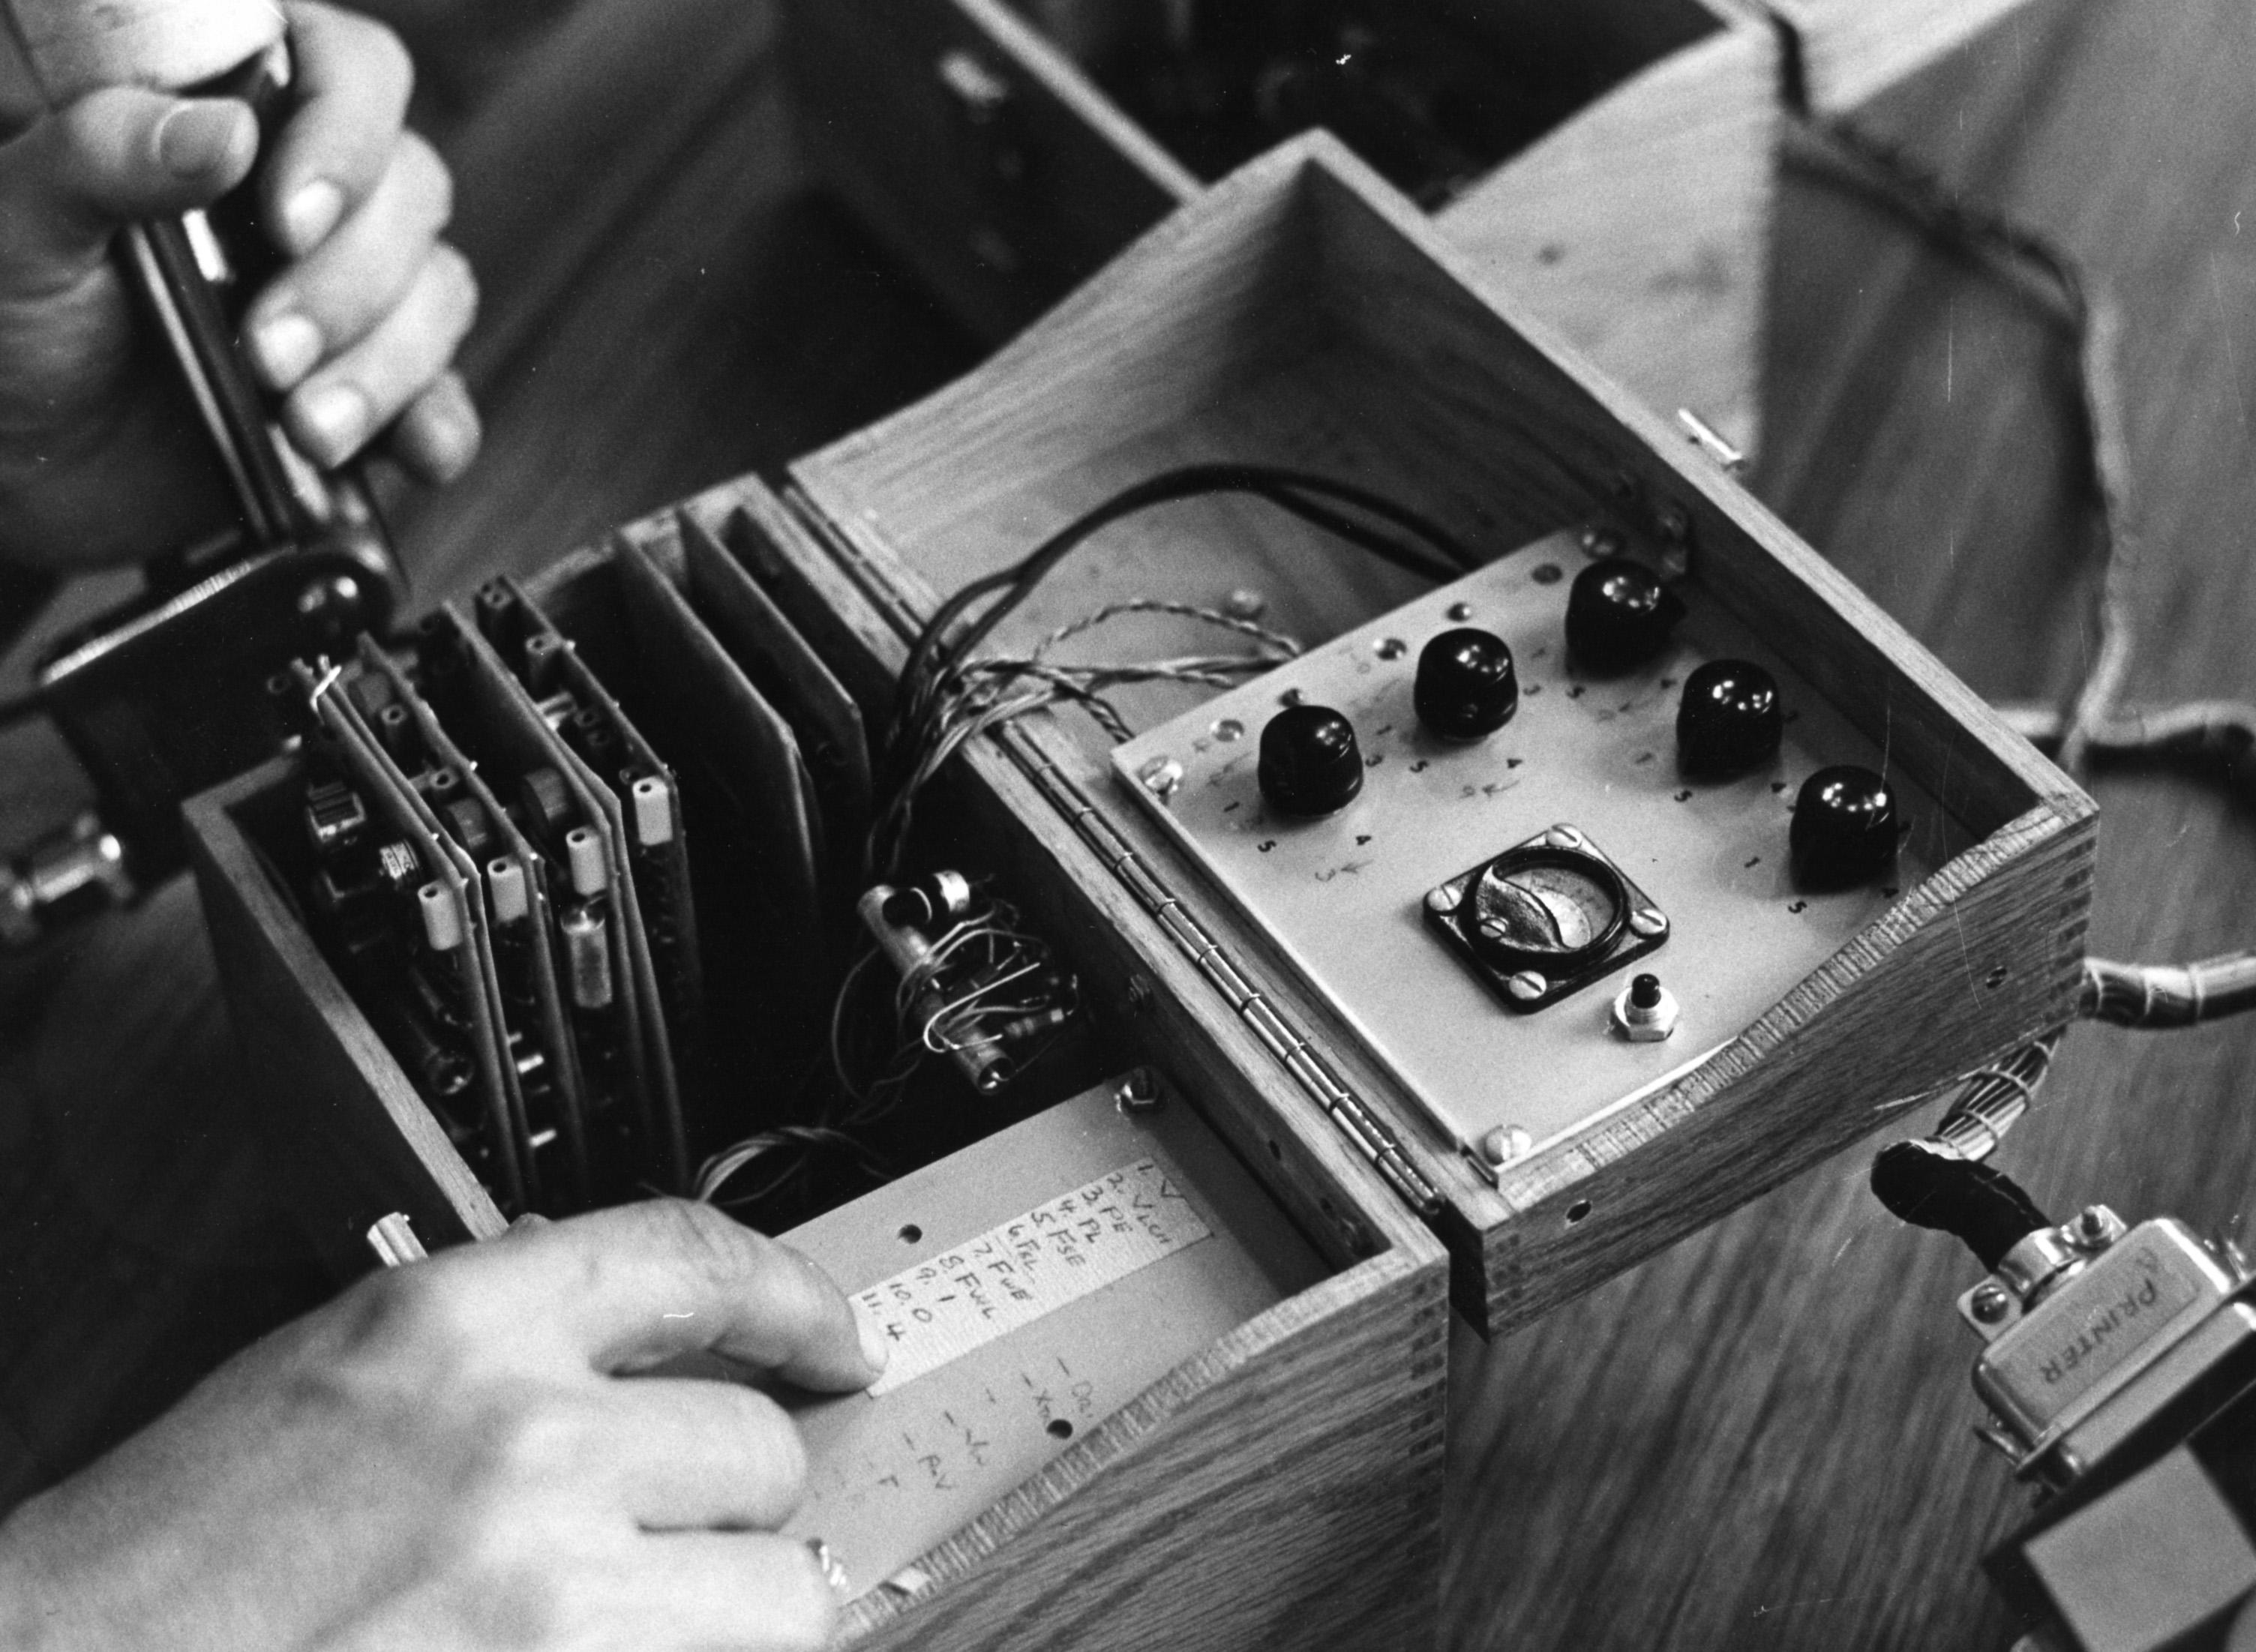 IBM on Twitter: "11-15-61: IBM demonstrated "Shoebox," an experimental machine that does arithmetic on voice command http://t.co/aQQpYxmYuV" / Twitter